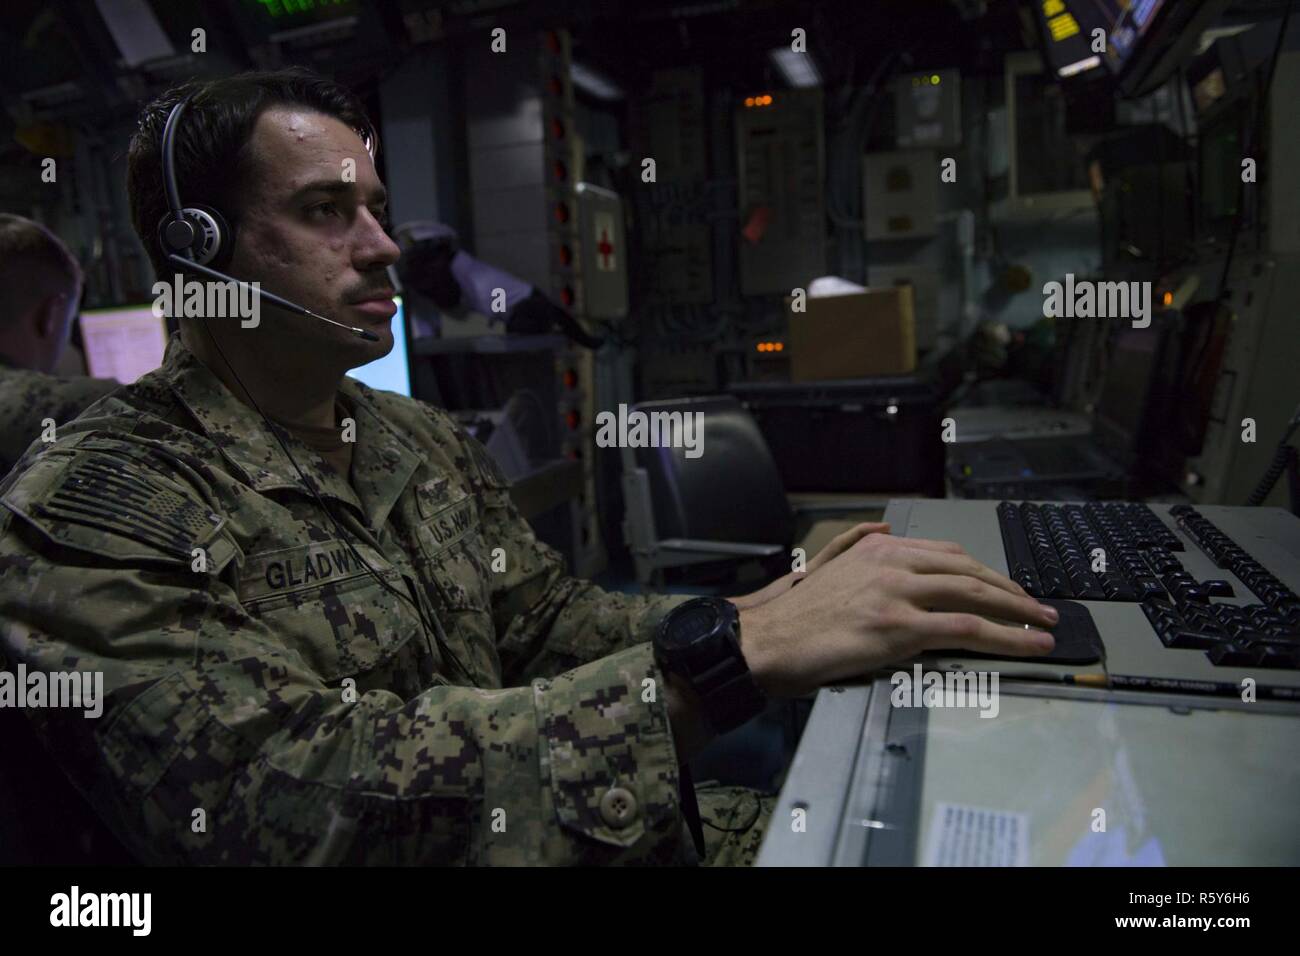 5TH FLEET AREA OF OPERATIONS (April 23, 2017) Air Traffic Controlman 3rd Class Michael Gladwin from Tactical Air Traffic Control Squadron 21 stands watch in the Tactical Air Traffic Control Center aboard the amphibious assault ship USS Bataan (LHD 5). The ship and its ready group are deployed in the U.S. 5th Fleet area of operations in support of maritime security operations designed to reassure allies and partners, and preserve the freedom of navigation and the free flow of commerce in the region. Stock Photo